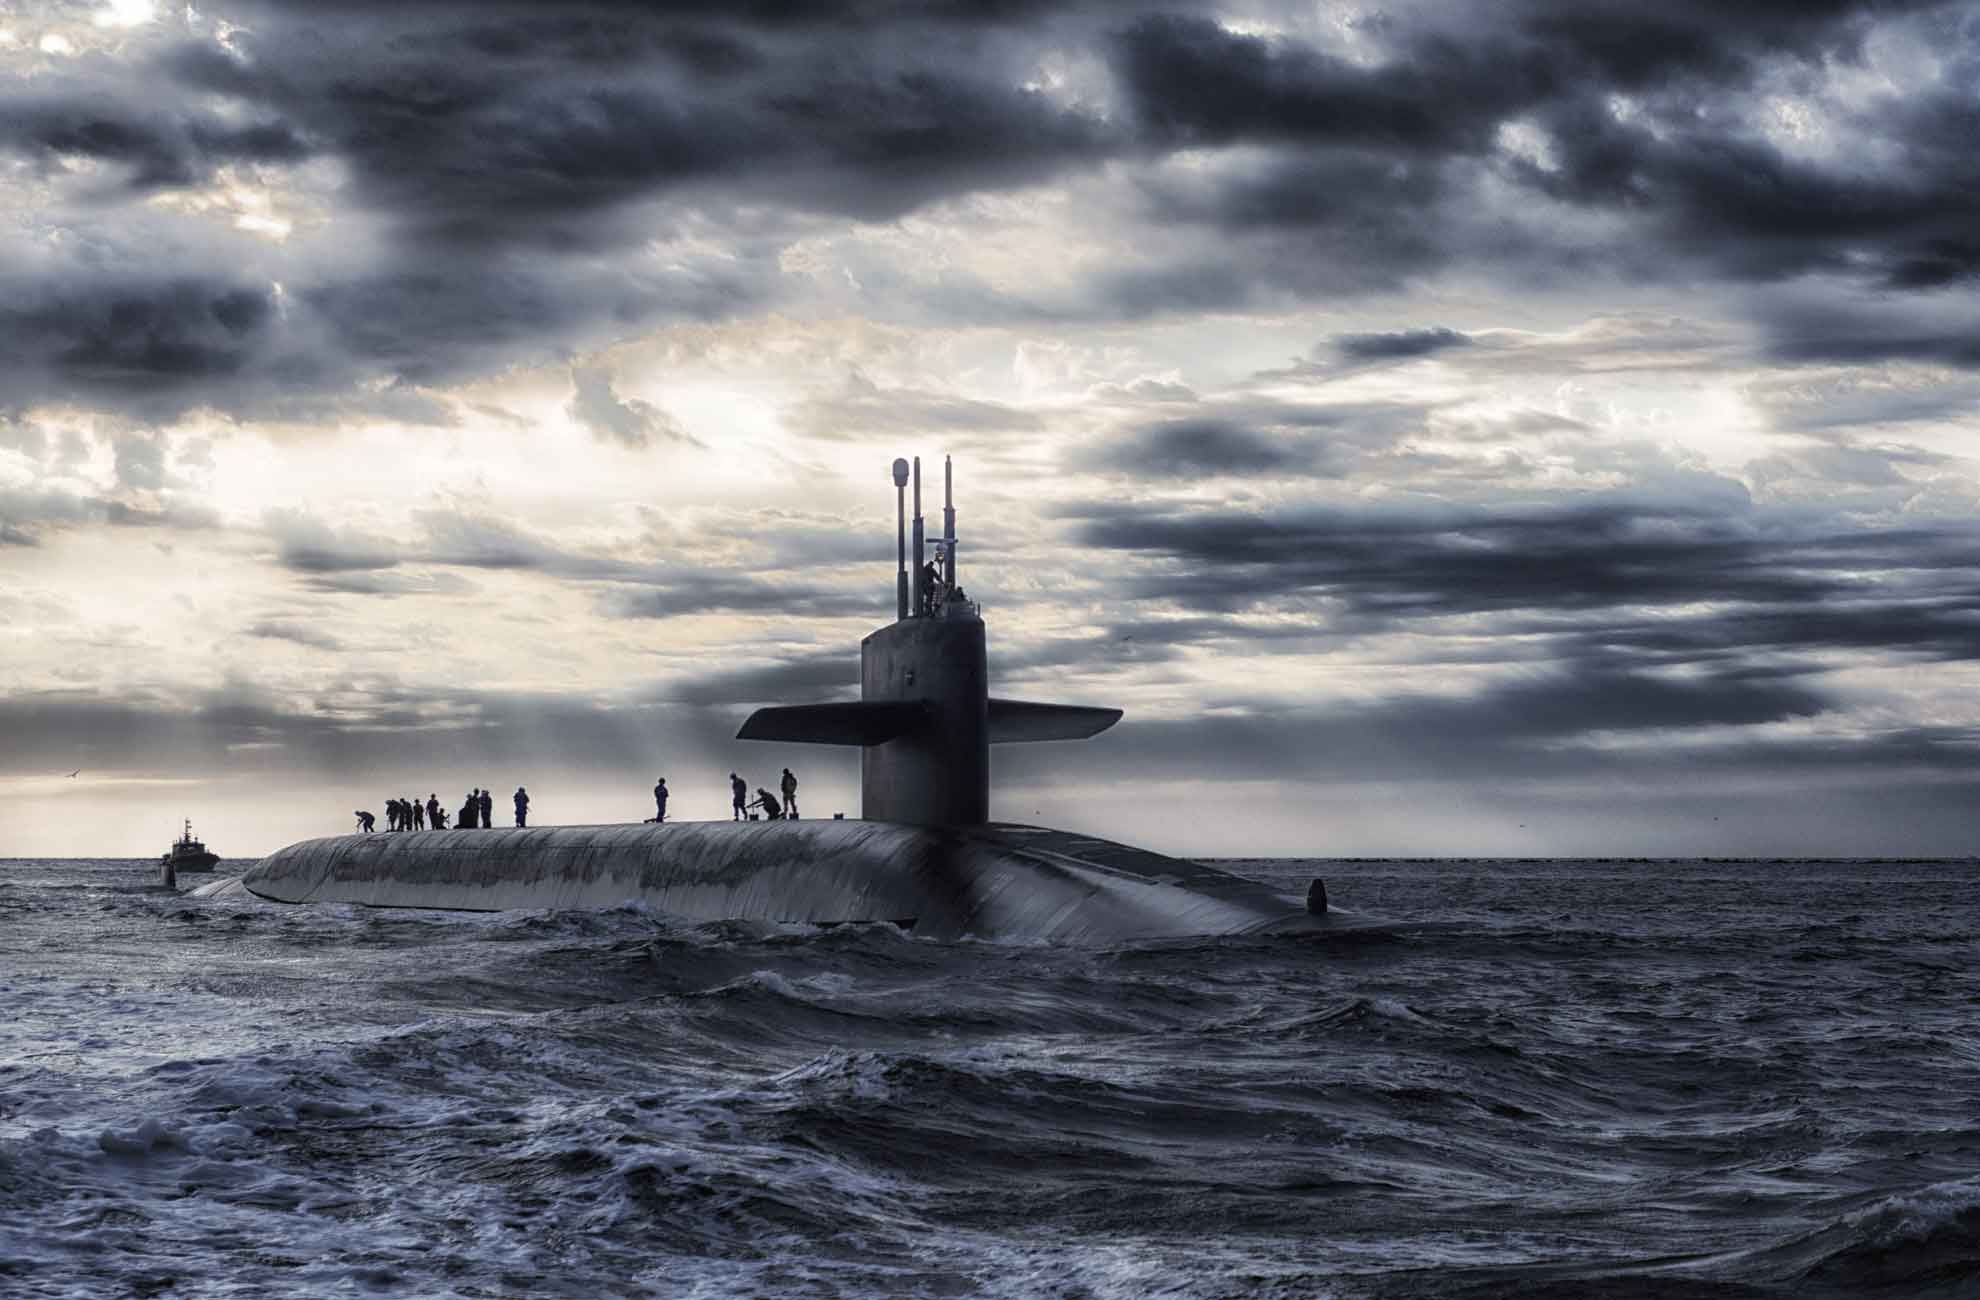 Submarine Serving in the oceons of the world.